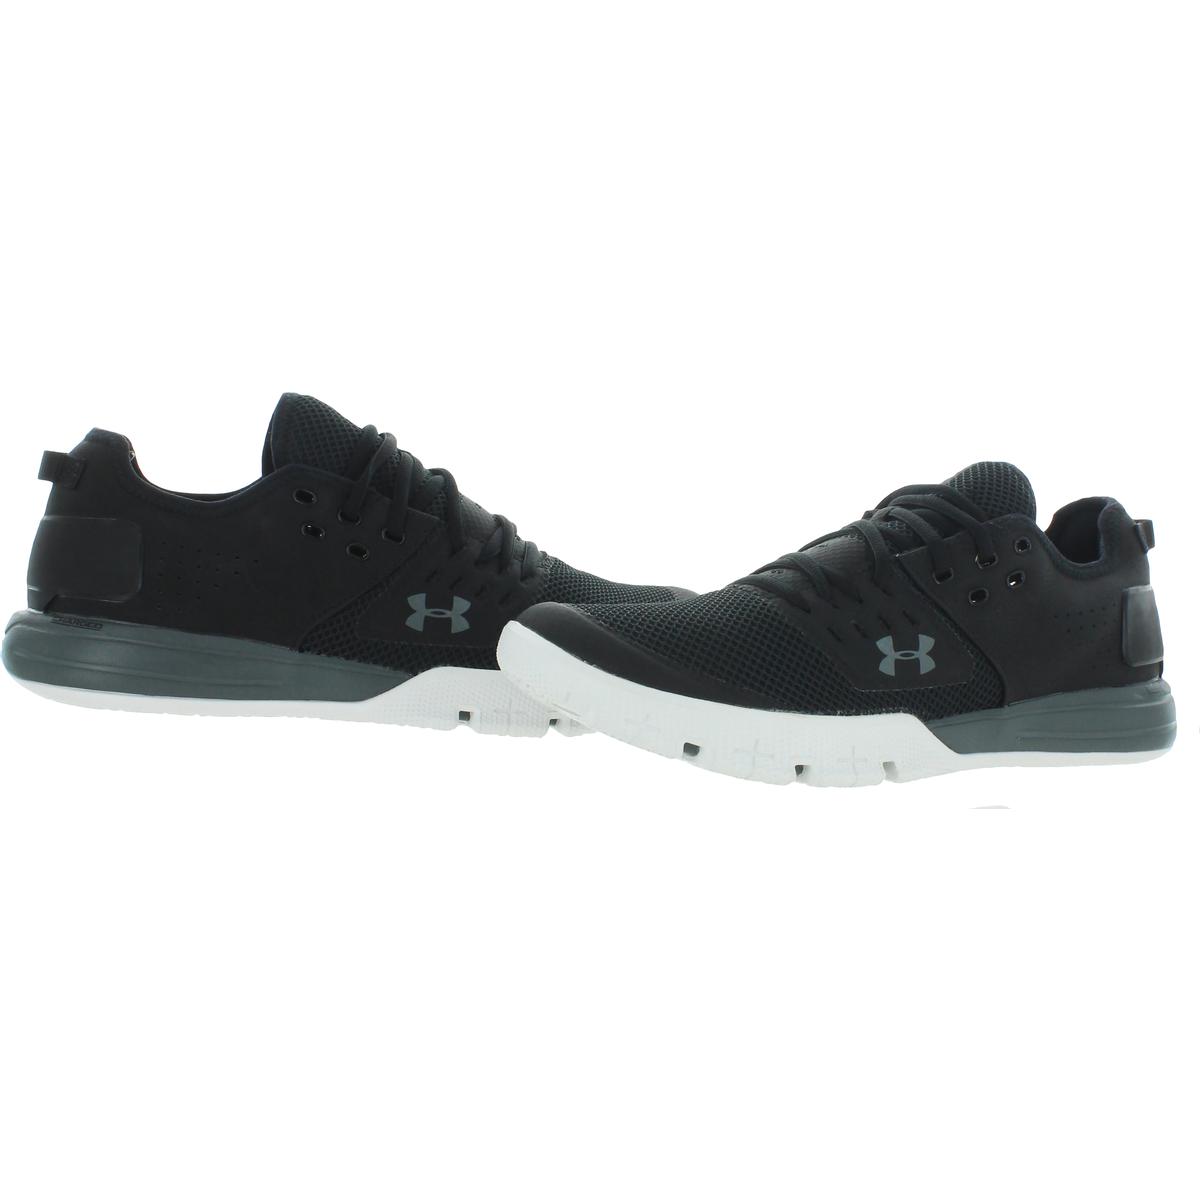 Under Armour Ultimate Turf Trainer Mens Training Shoes Black SNEAKERS ...